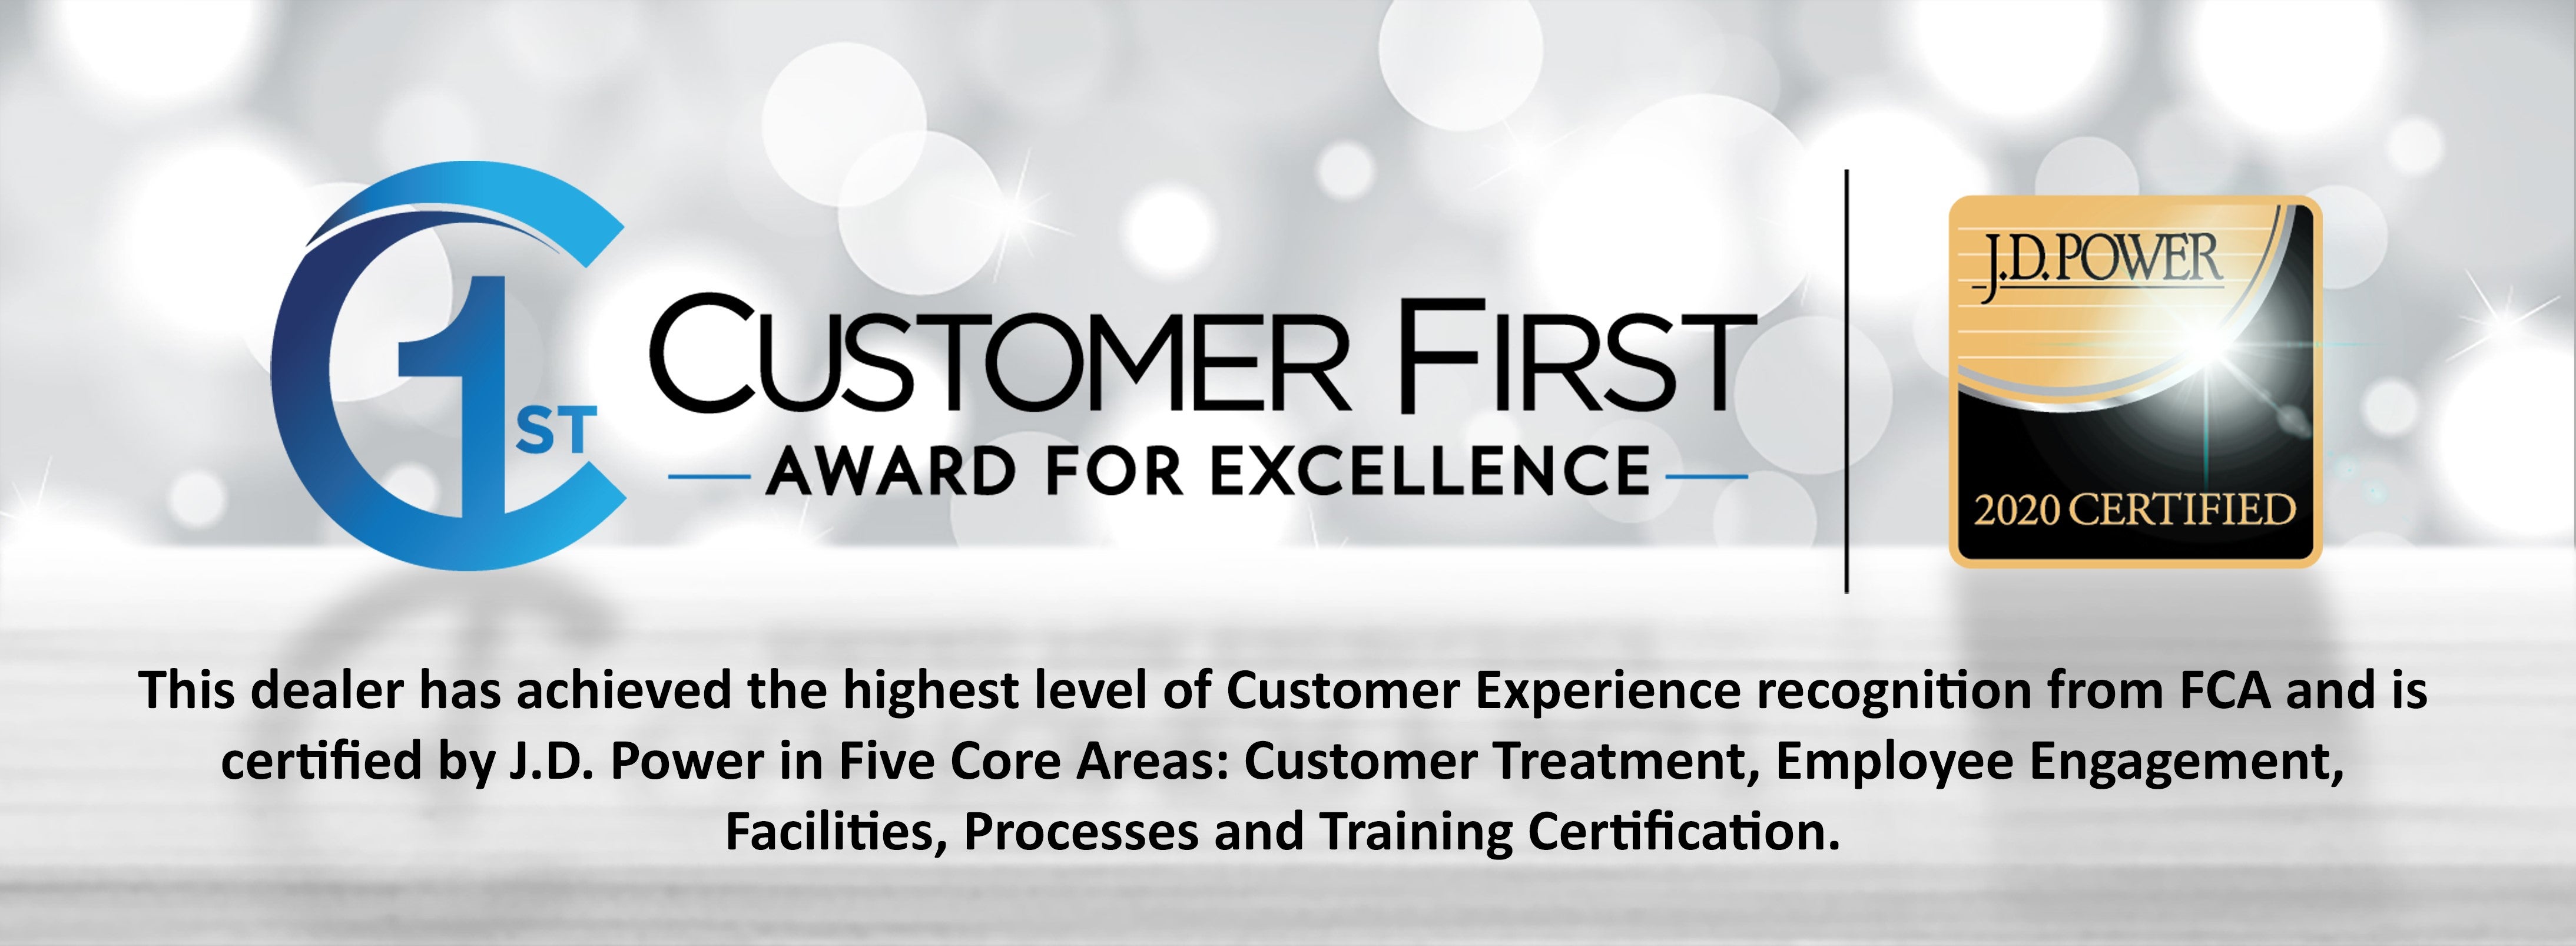 Customer First Award for Excellence for 2019 at Charlevoix Chrysler Dodge Jeep Ram in Charlevoix, MI